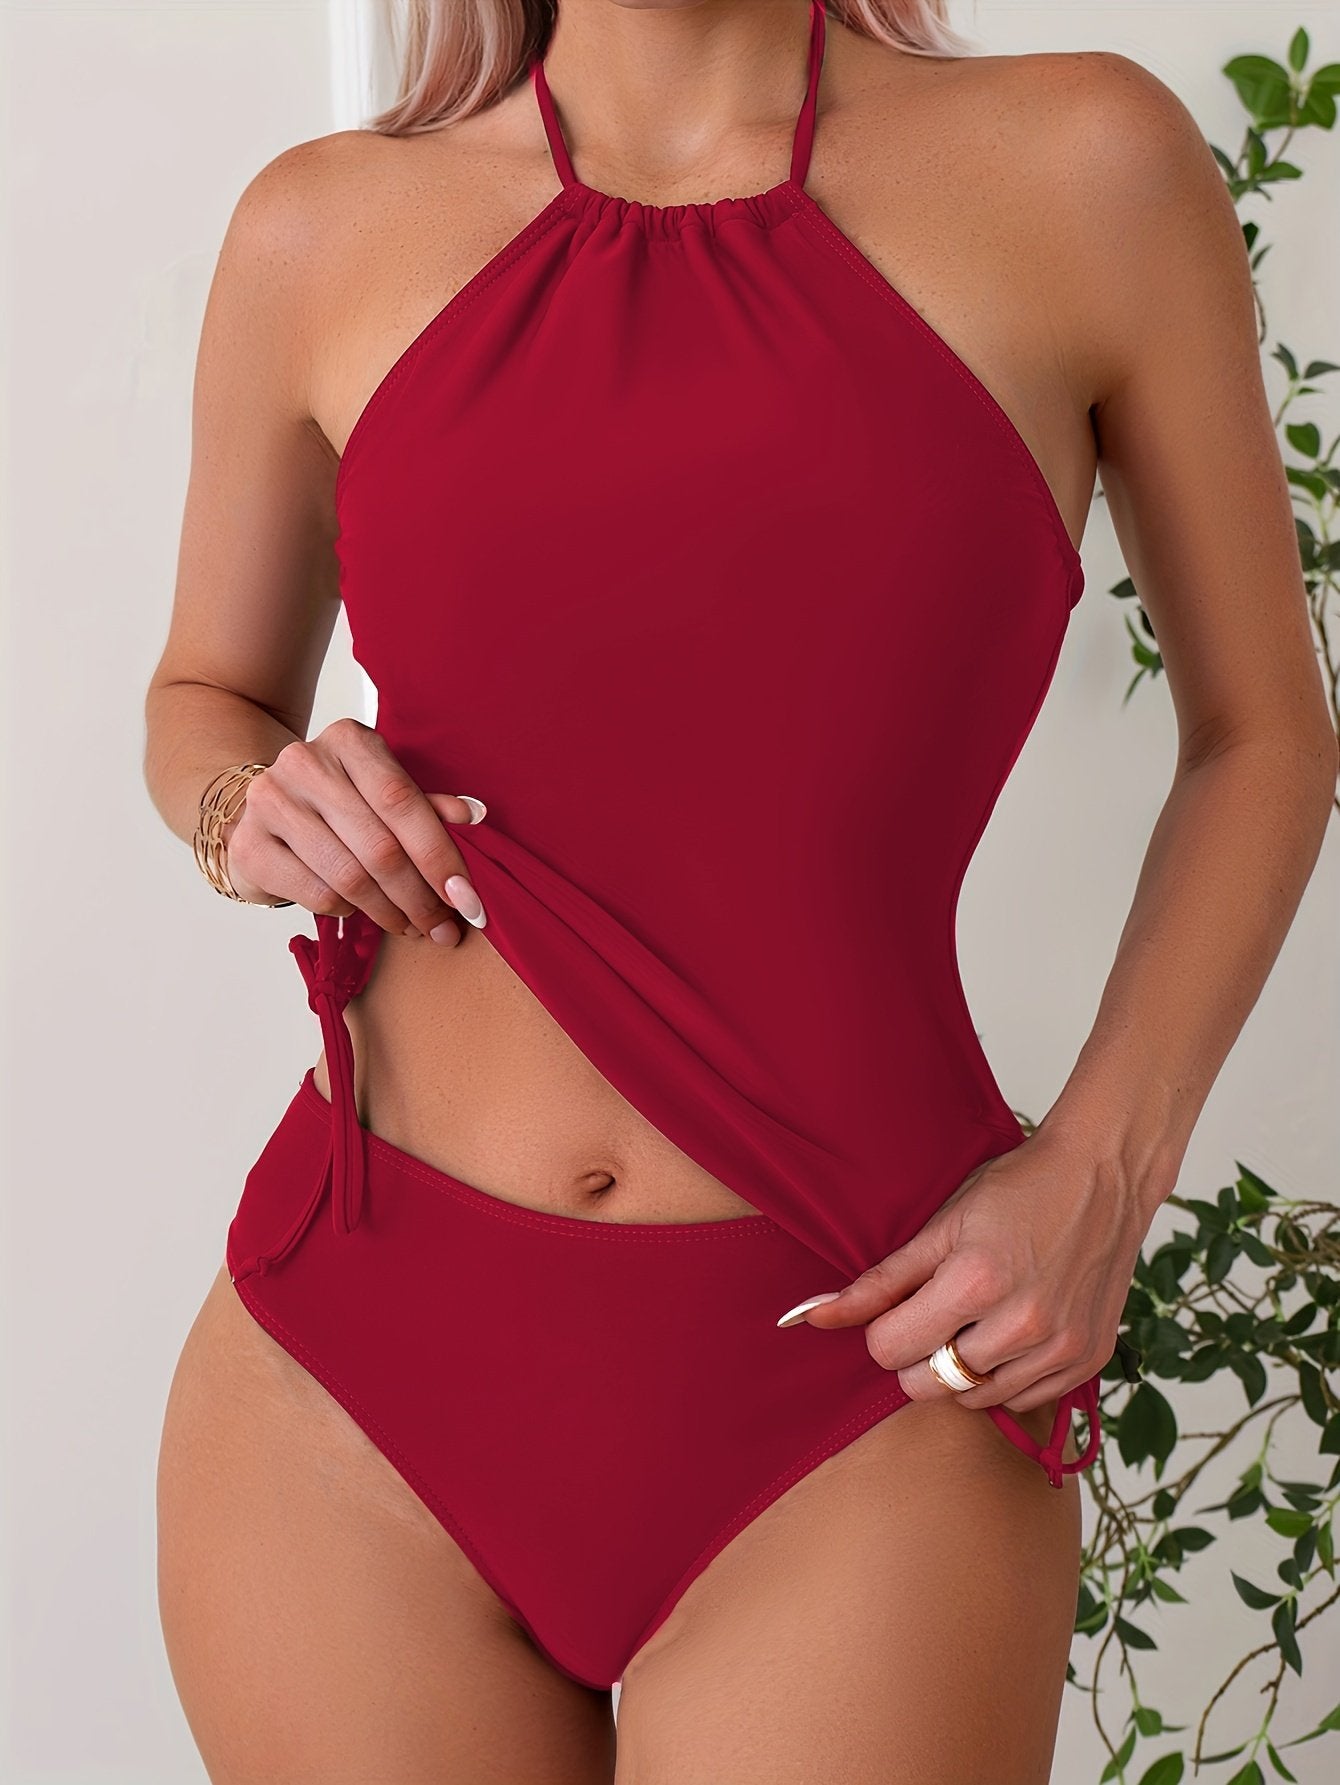 Solid Color Casual Two Piece Swimsuit Halter Neck Round High Cut Drawstring Tie Side Tankini